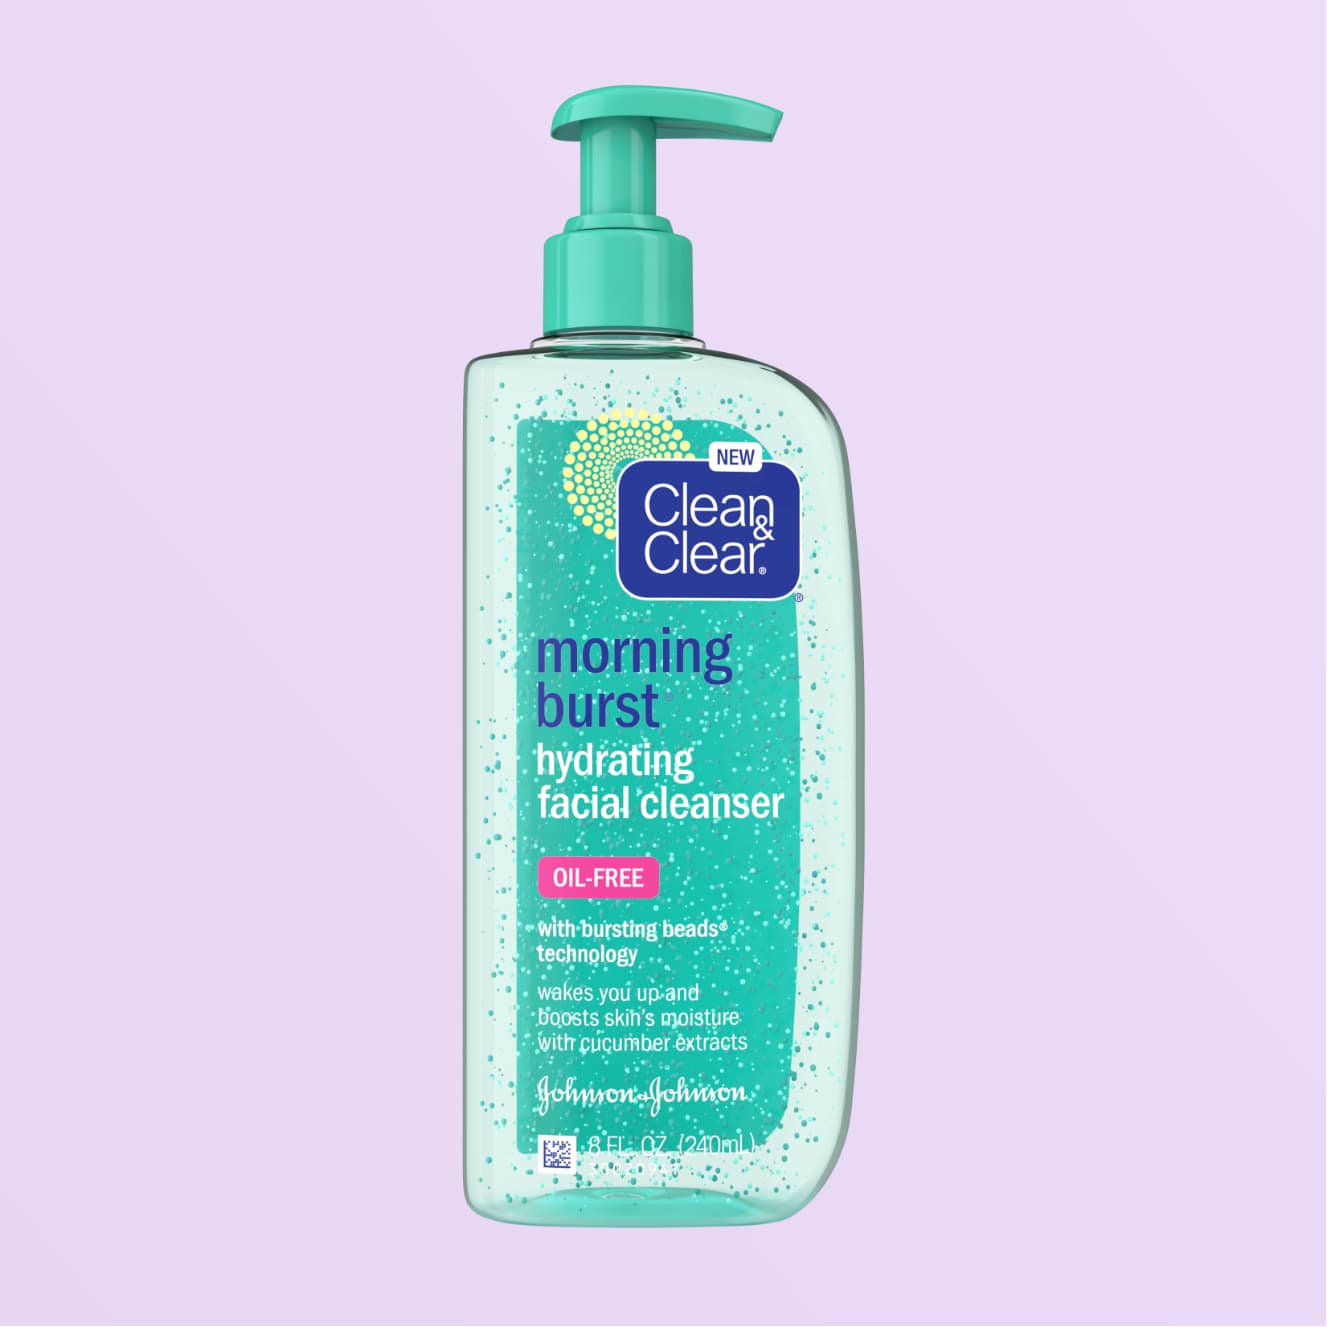 Morning Burst® Hydrating Facial Cleanser with Bursting Beads®, formulated with water, helps to deep clean and refresh skin, and won't clog pores.